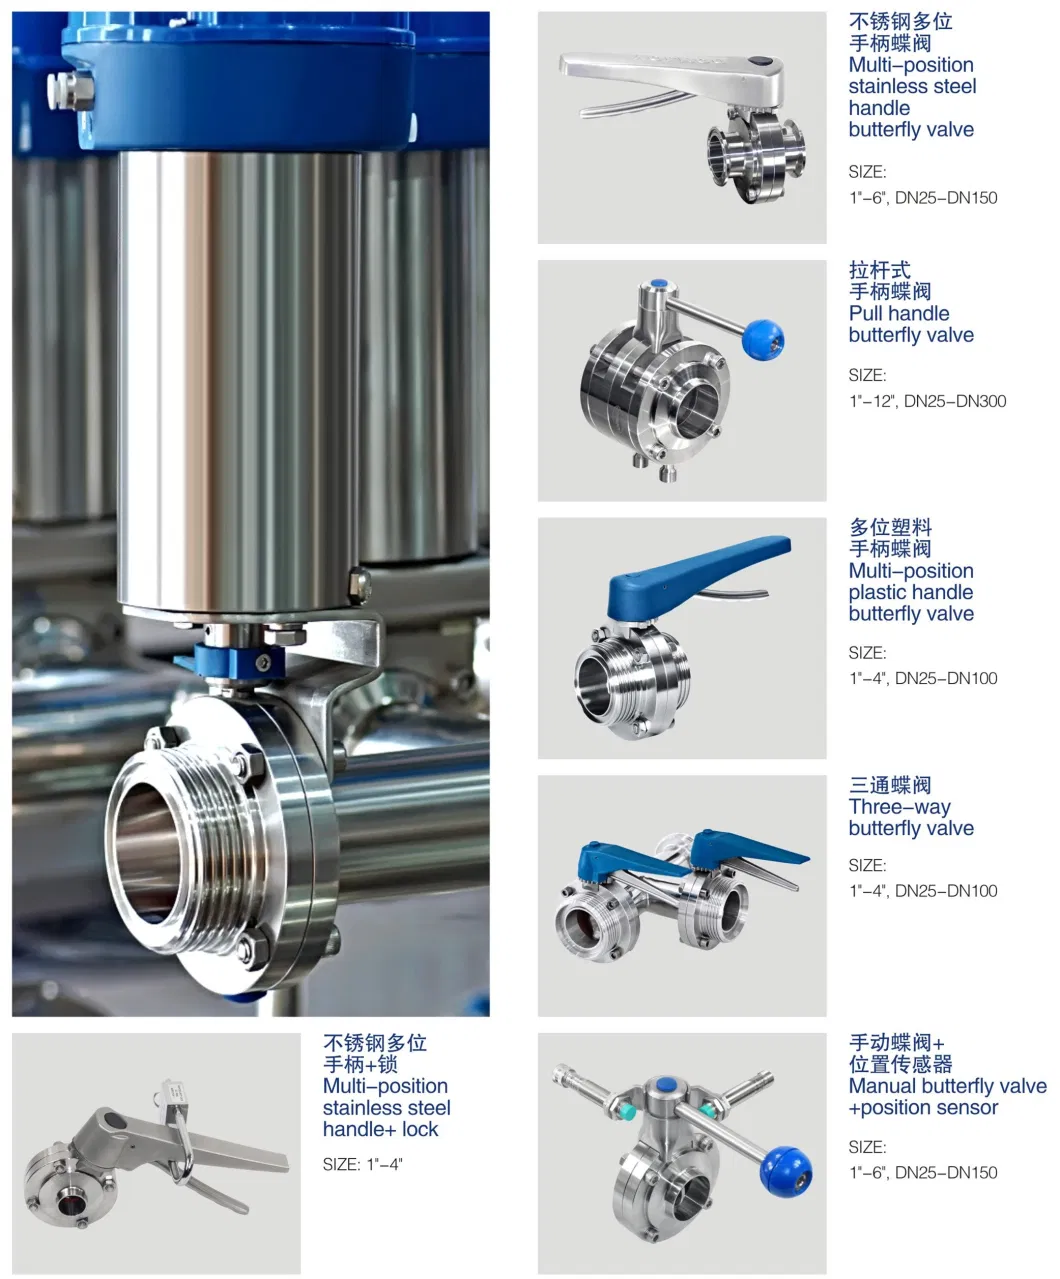 Stainless Steel Clamp Butterfly Manual Valve with Multi Position Handle